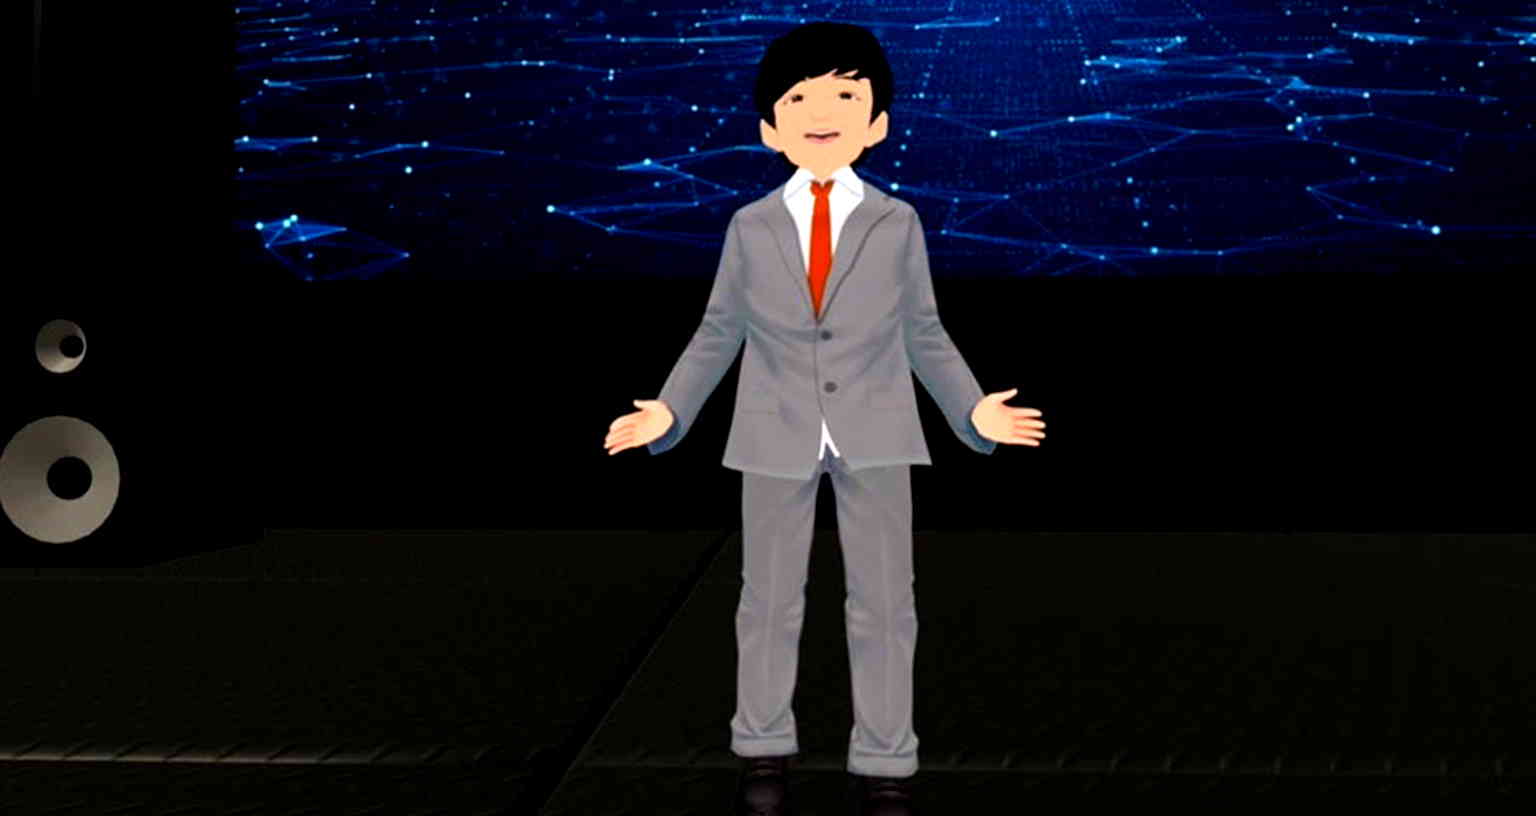 3,800 Japanese students kick off the new school year virtually in the metaverse